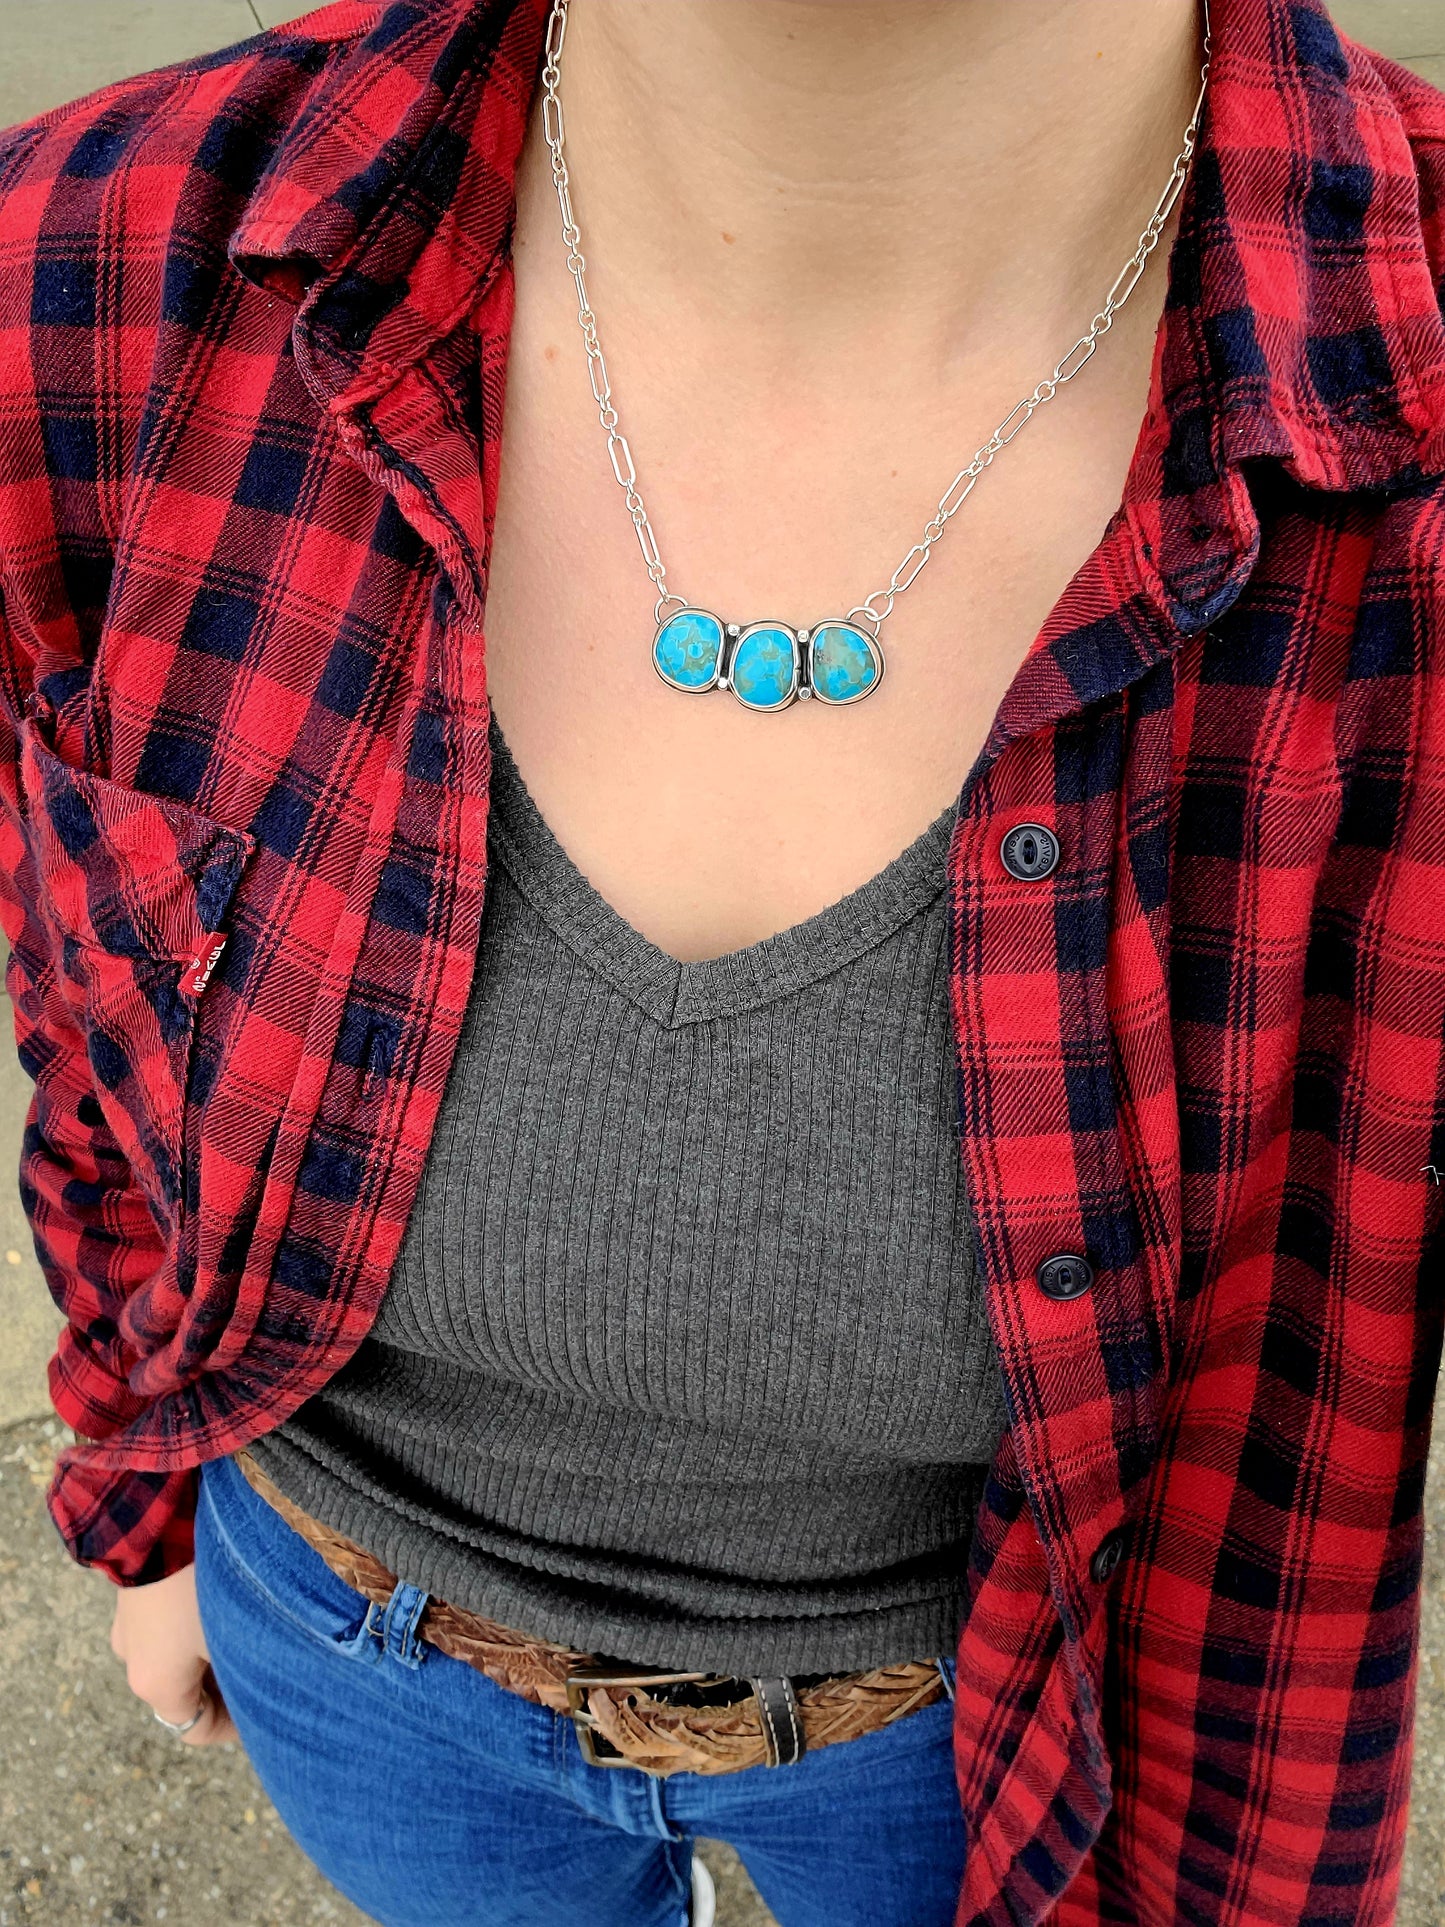 Bar turquoise necklace